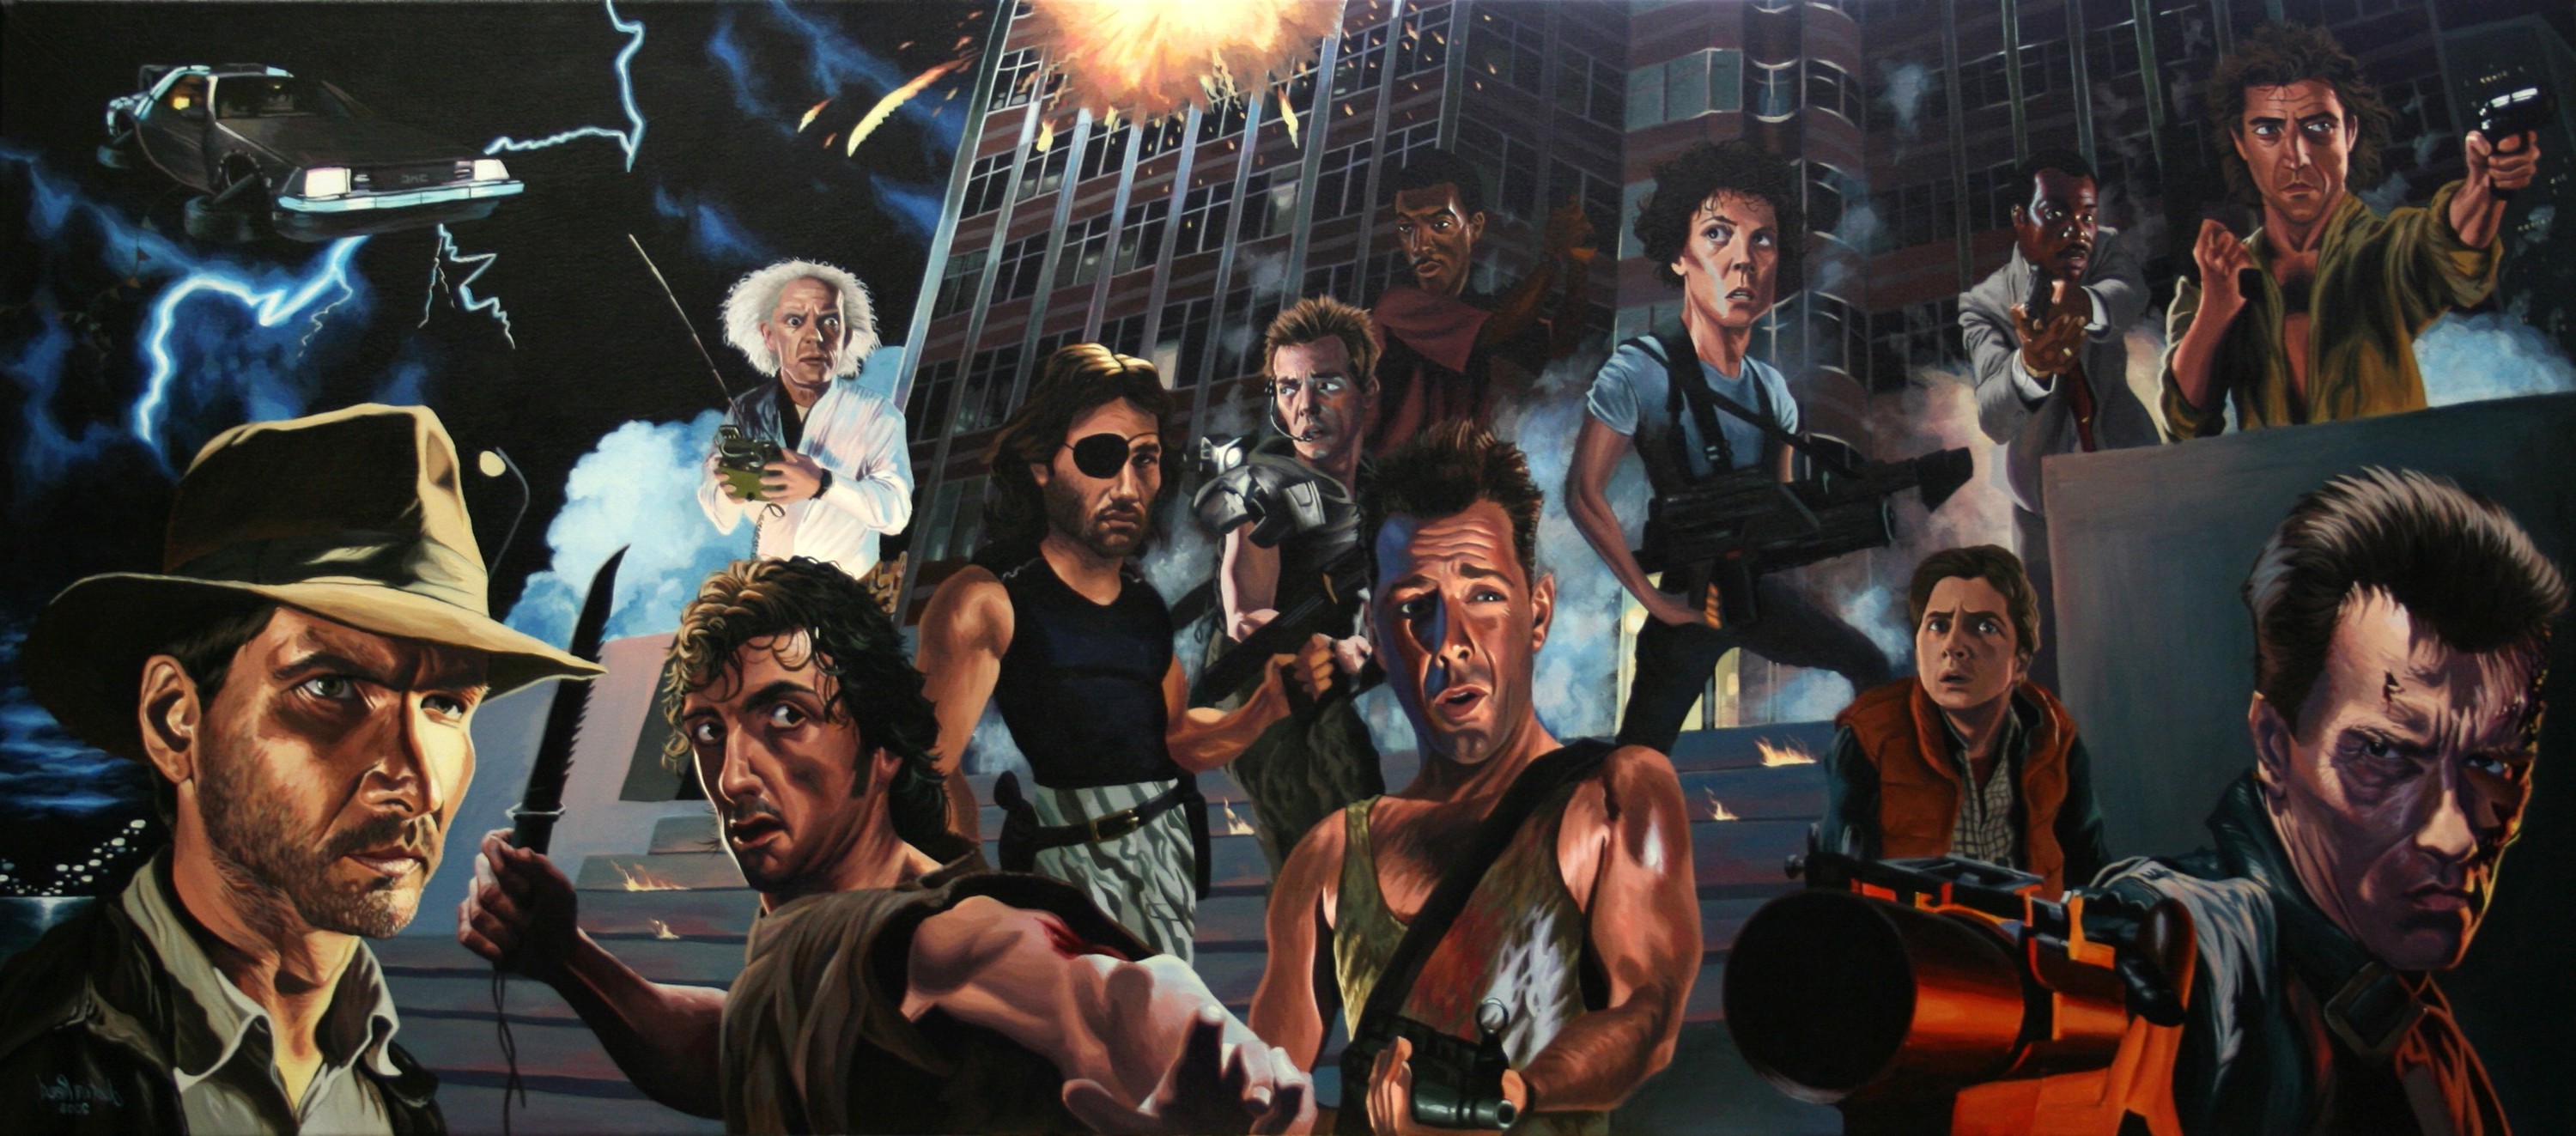 movies, Caricature, Terminator, Indiana Jones, Die Hard, Back To The Future, Alien (movie), Escape From New York, Rambo, Hollywood Wallpaper